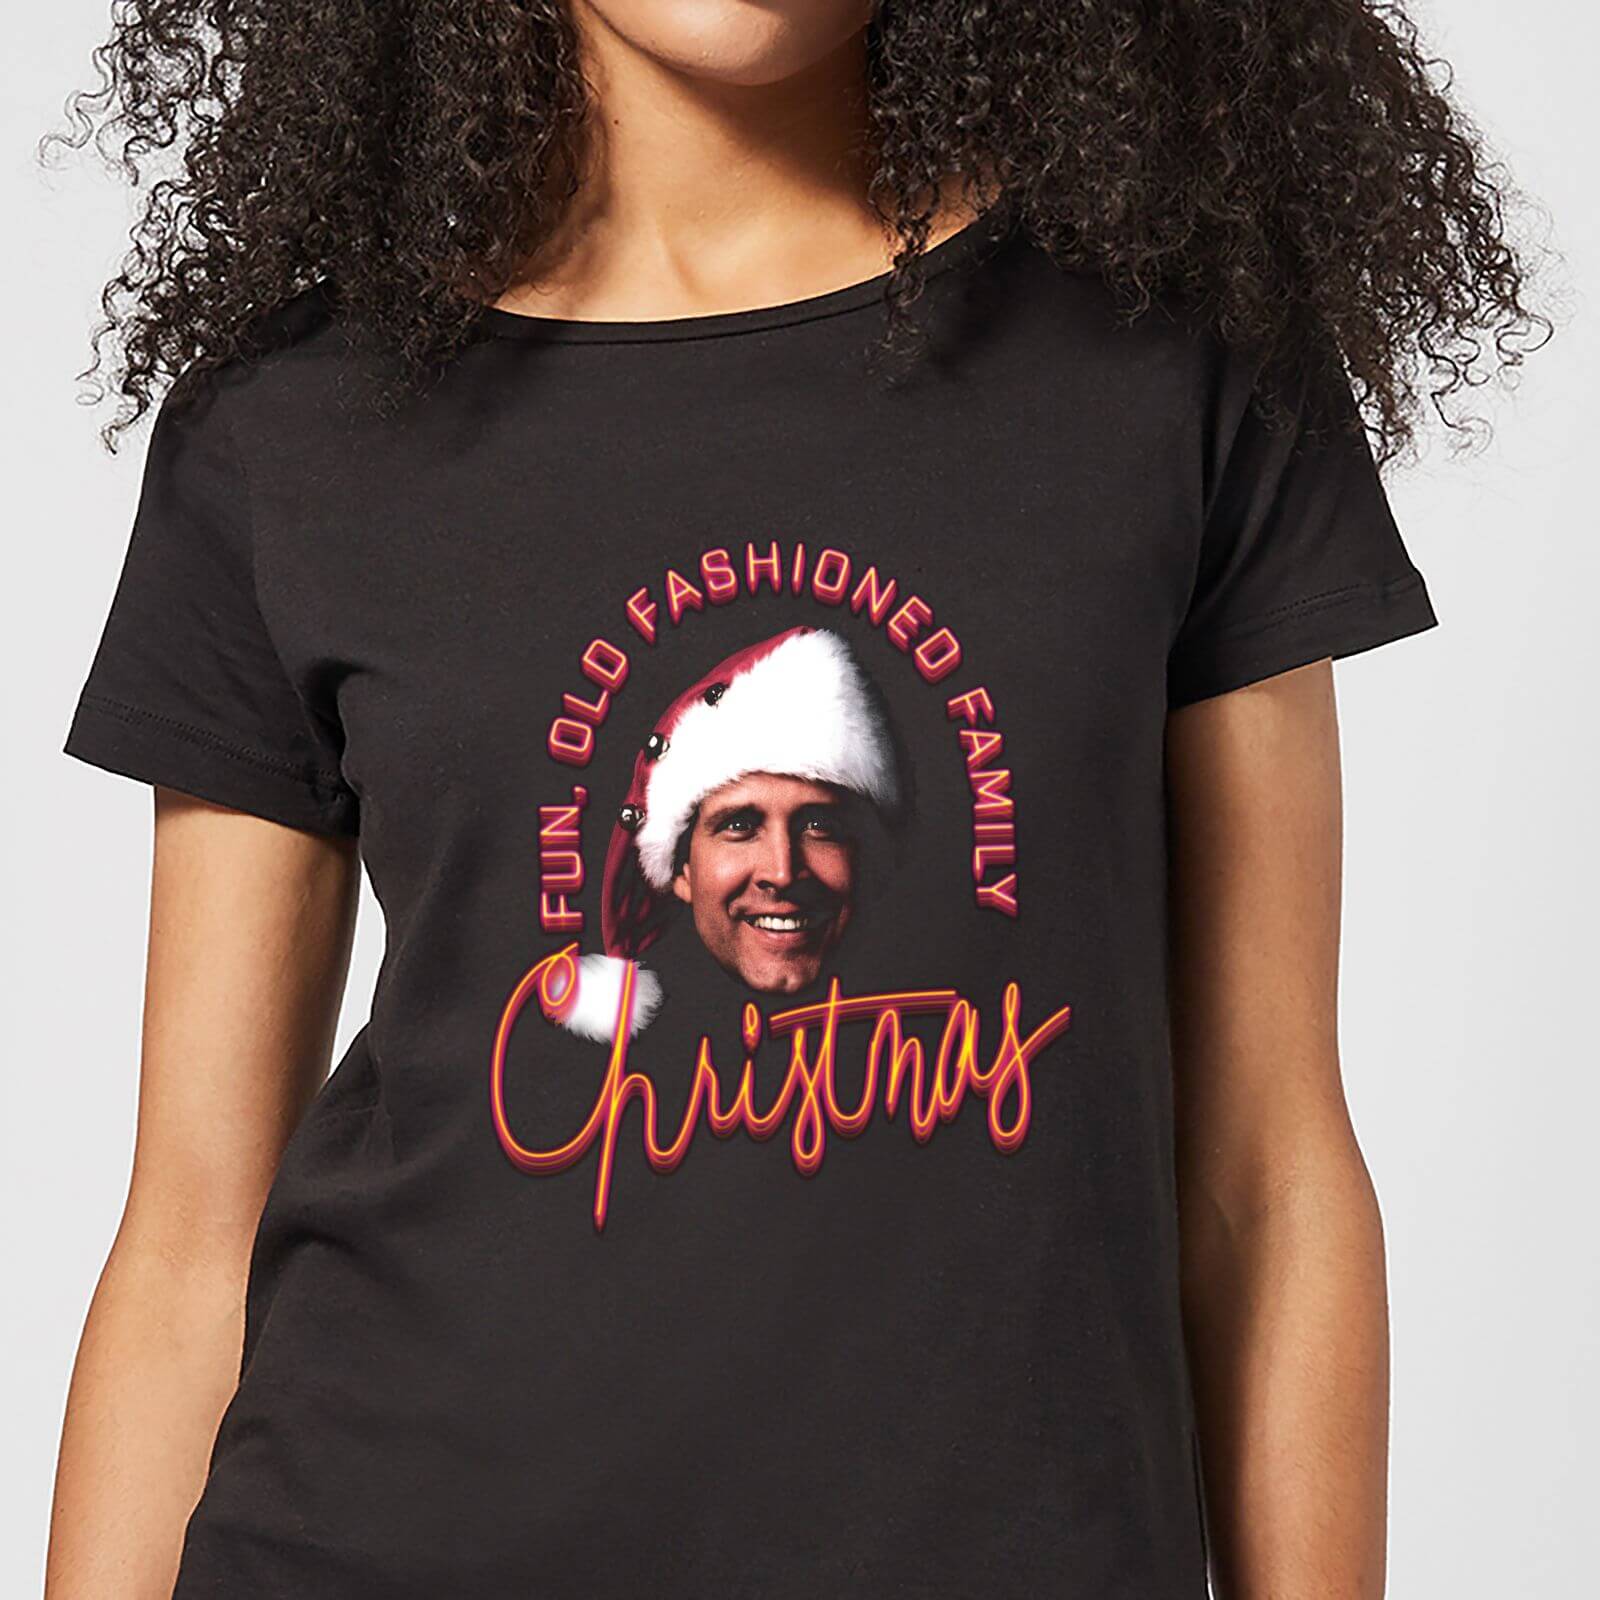 National Lampoons National lampoon fun old fashioned family christmas women's christmas t-shirt - black - m